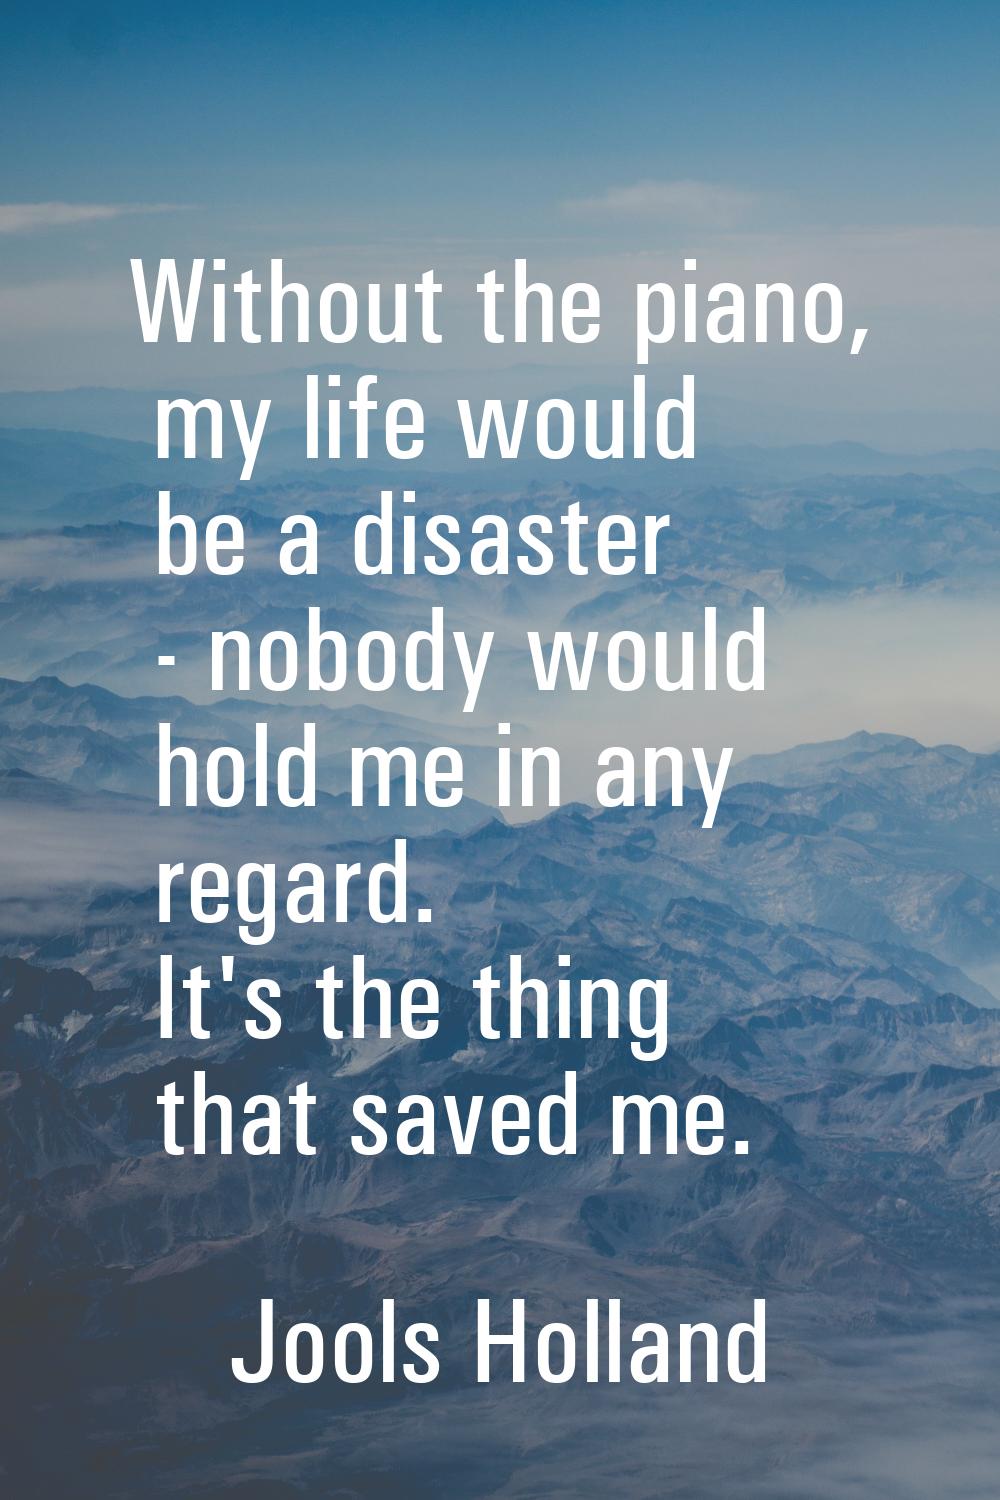 Without the piano, my life would be a disaster - nobody would hold me in any regard. It's the thing